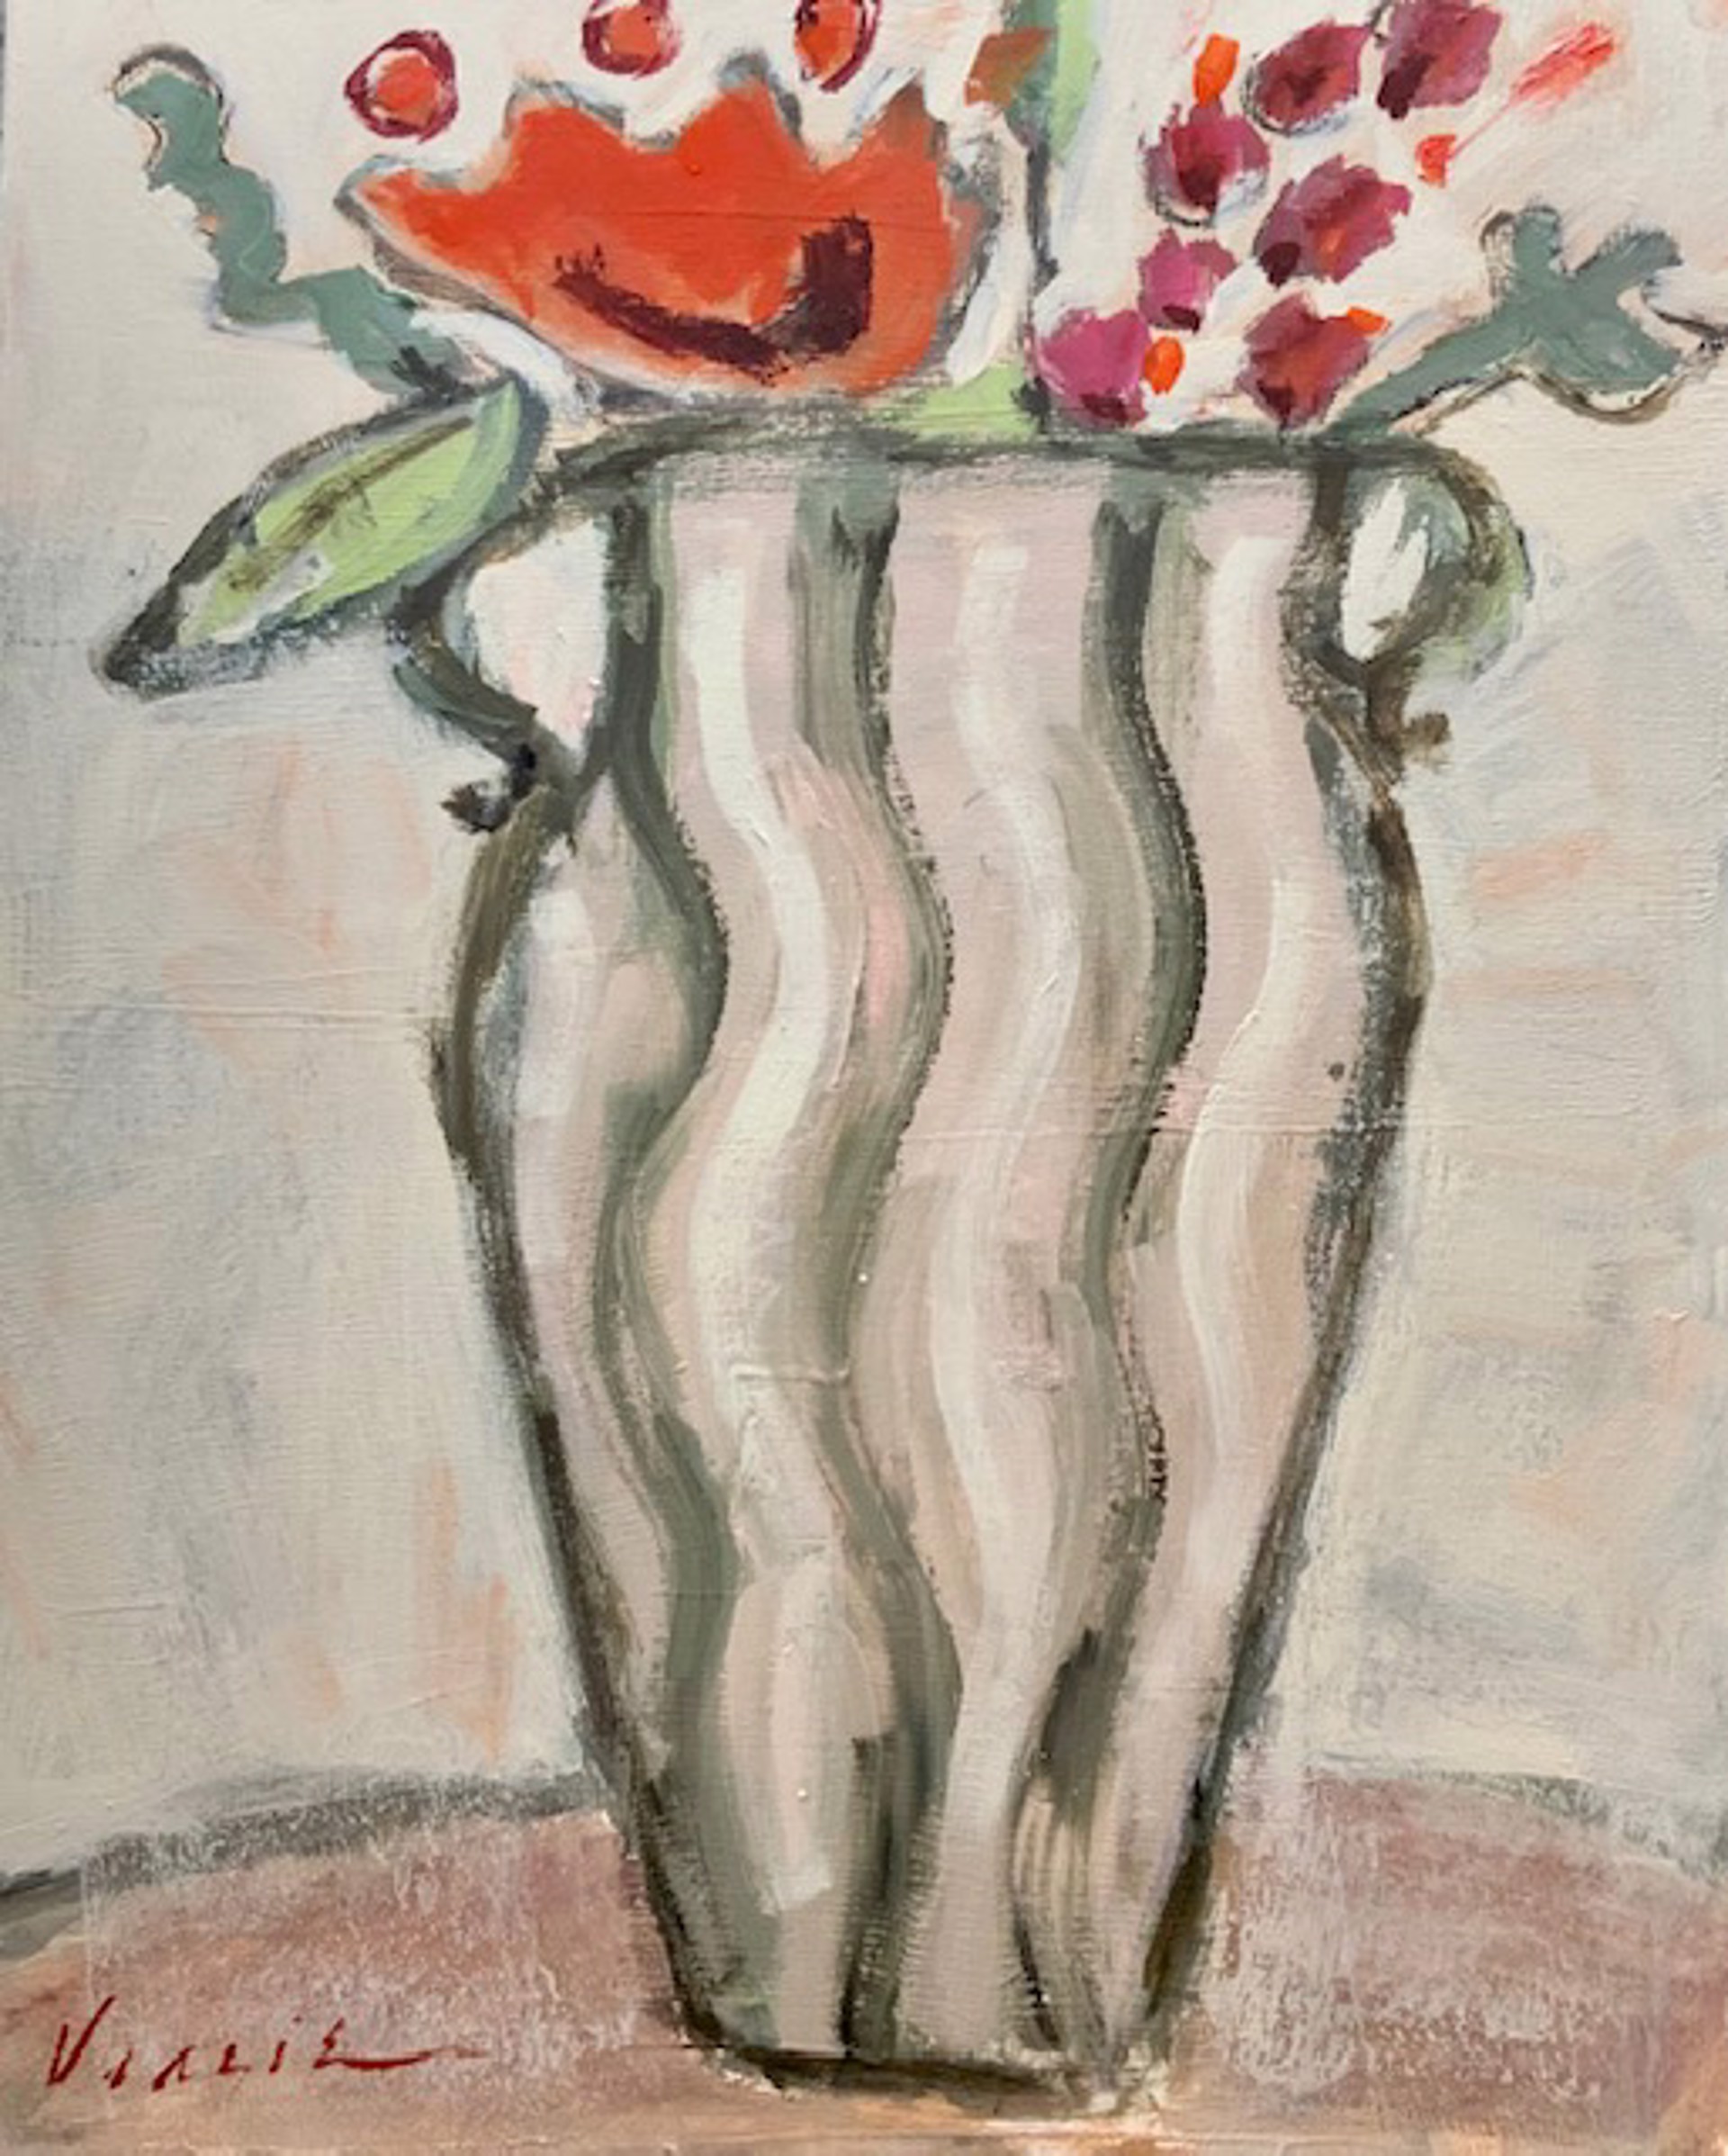 Striped Vase by Mary Miller Veazie